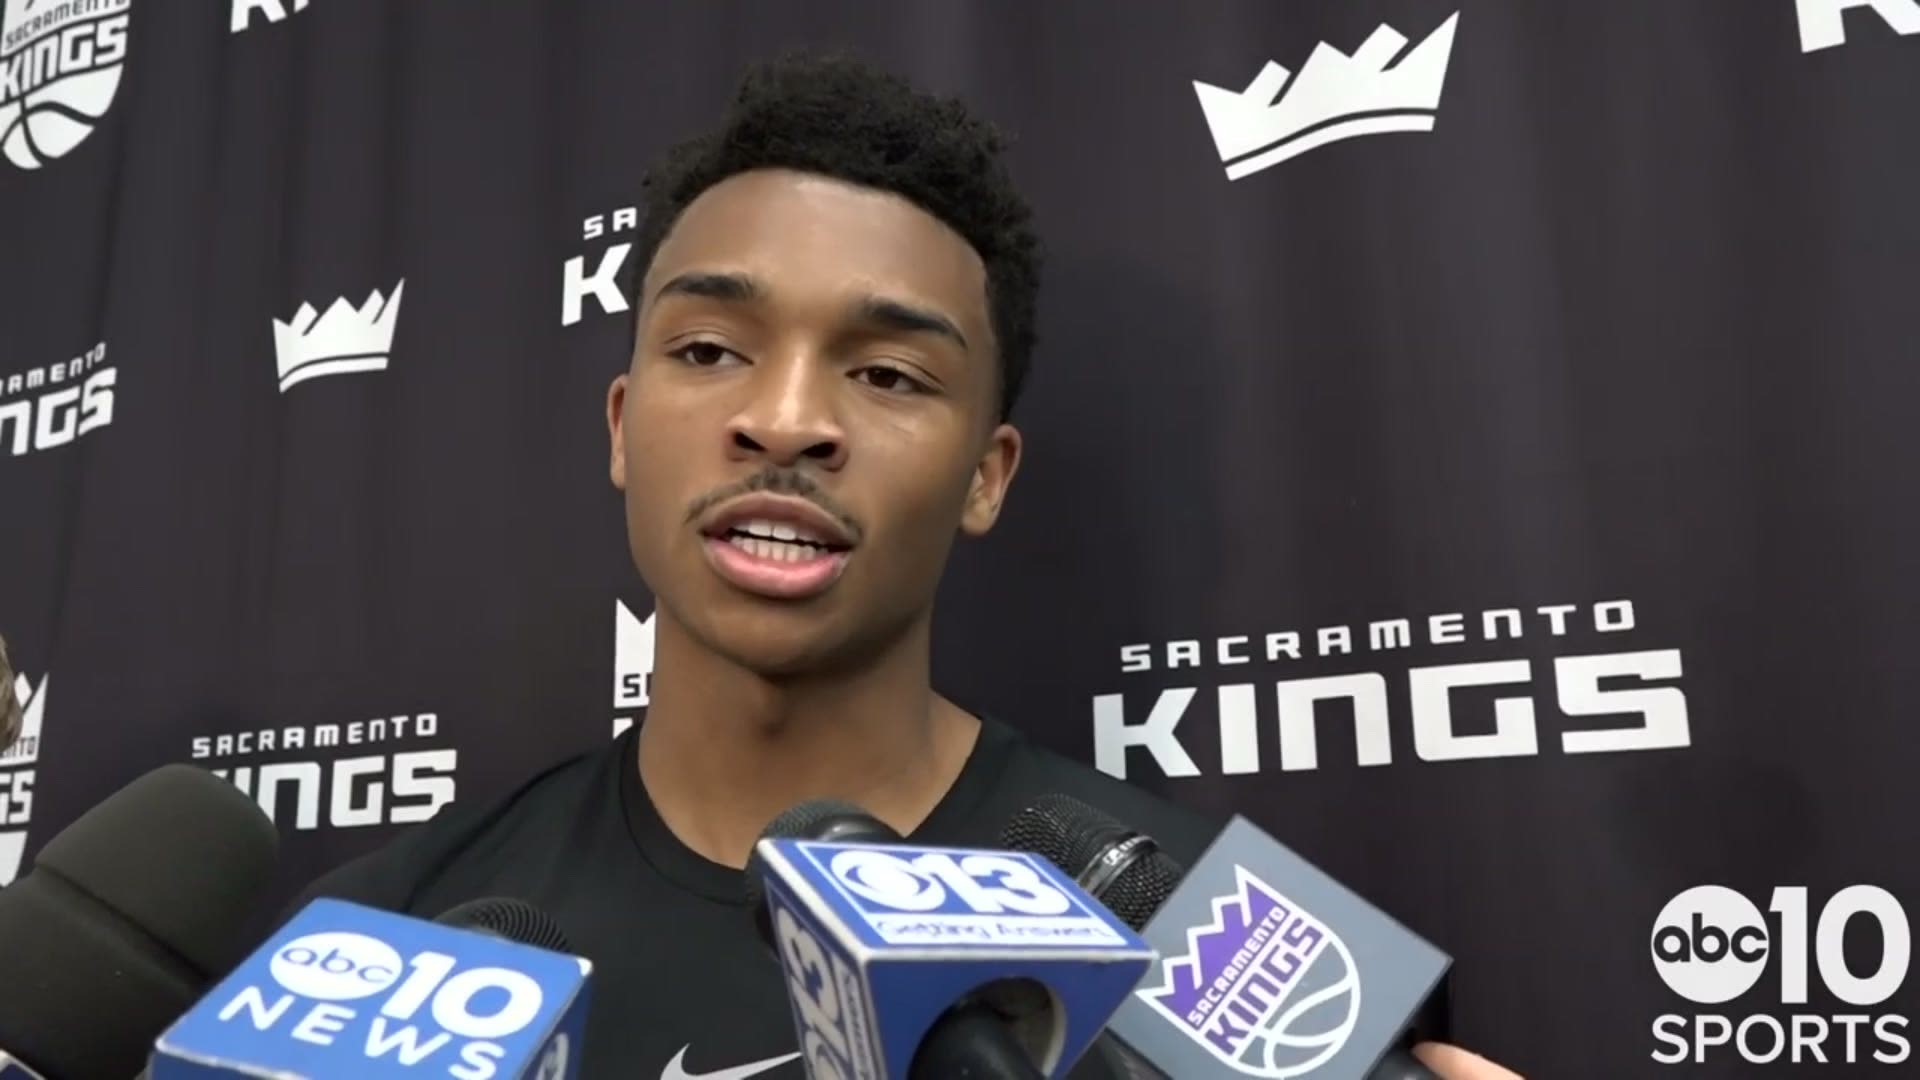 UCLA sophomore point guard Jaylen Hands discusses his pre-draft workout on Monday morning in Sacramento with the Kings and sharing a hometown with Kings' coach Luke Walton.